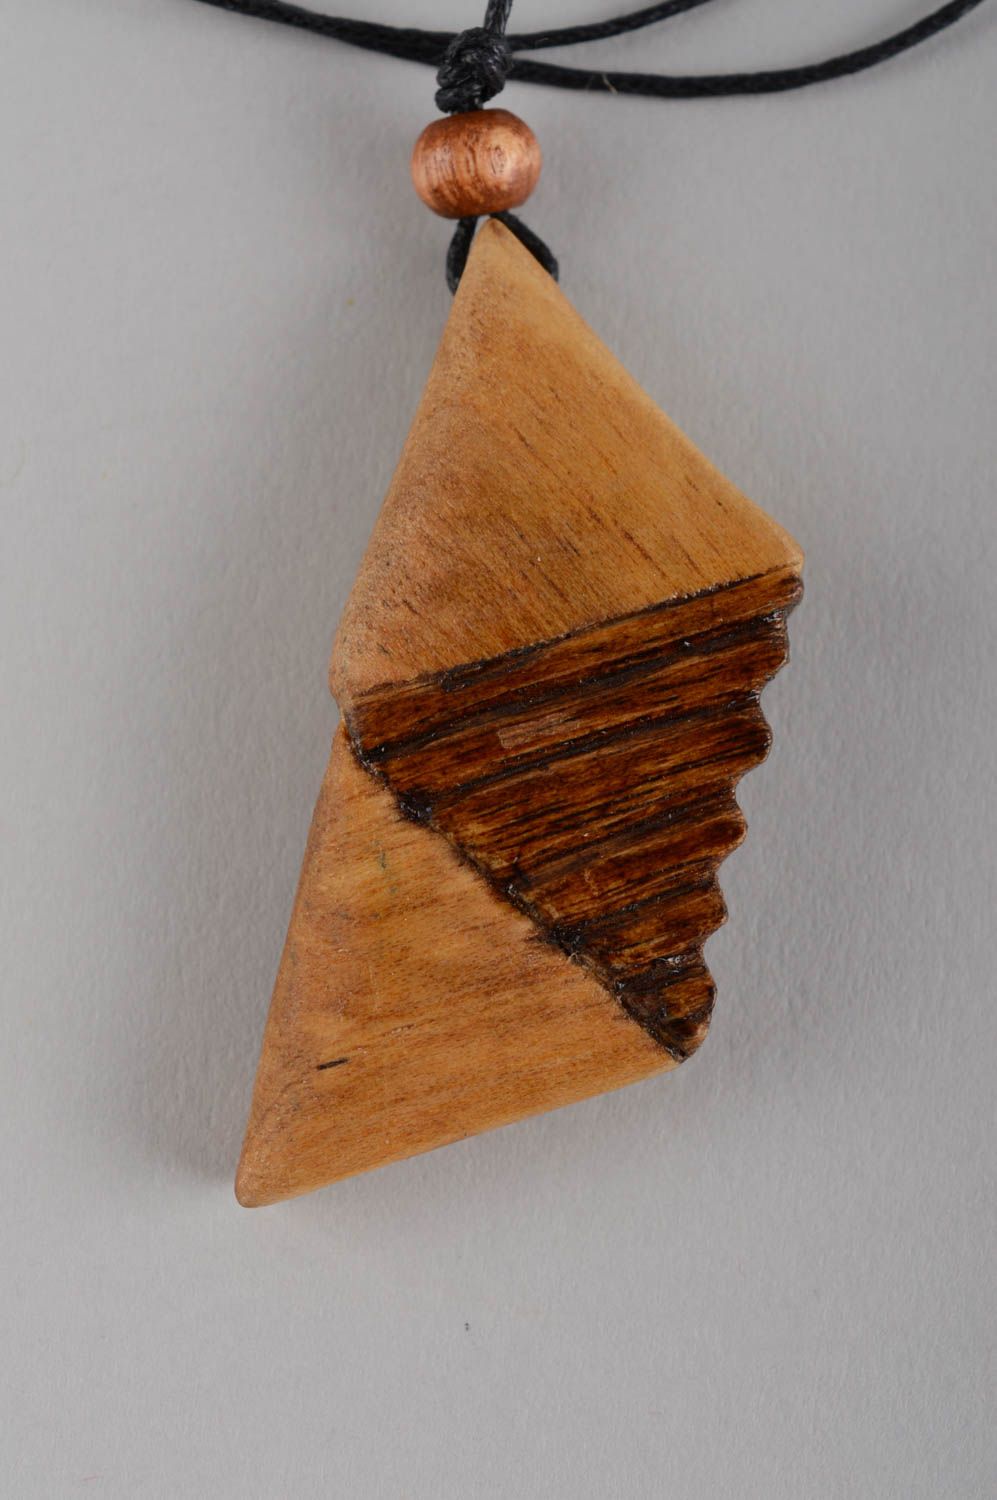 Stylish handmade wooden pendant artisan jewelry designs wood craft gifts for her photo 8